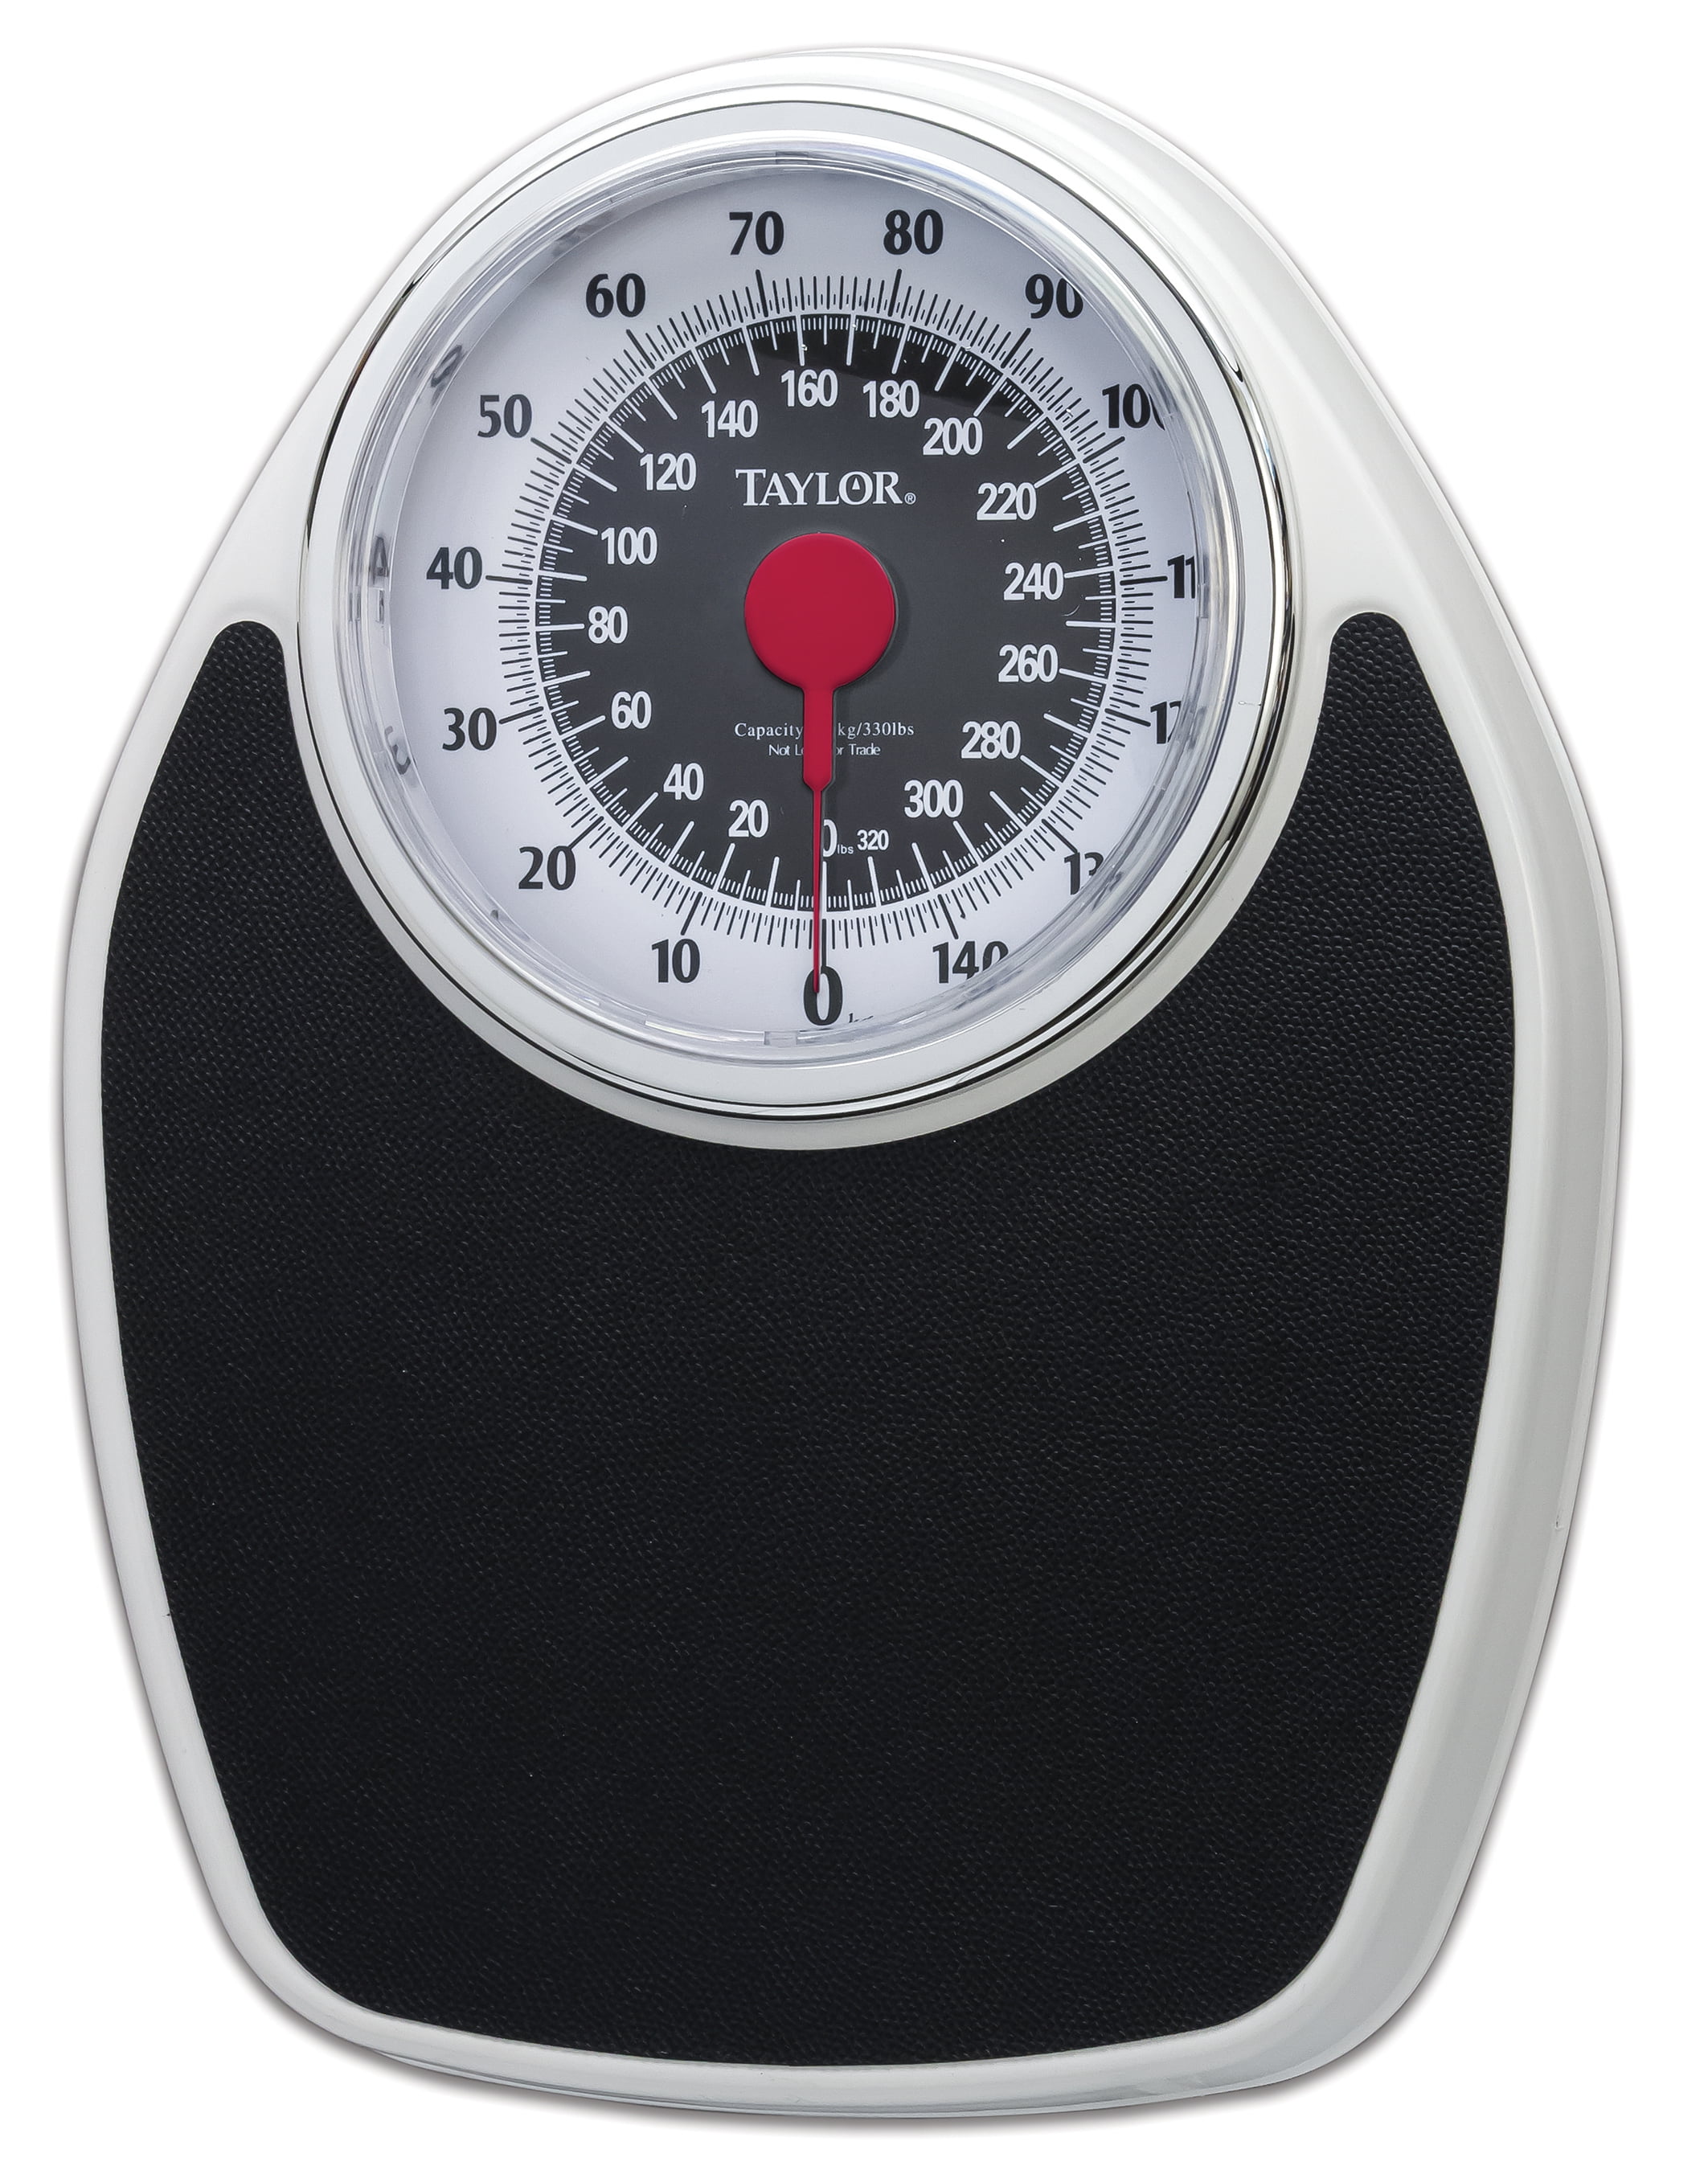 Weight Watchers Scales by Conair Extra-Large Dial Analog Precision